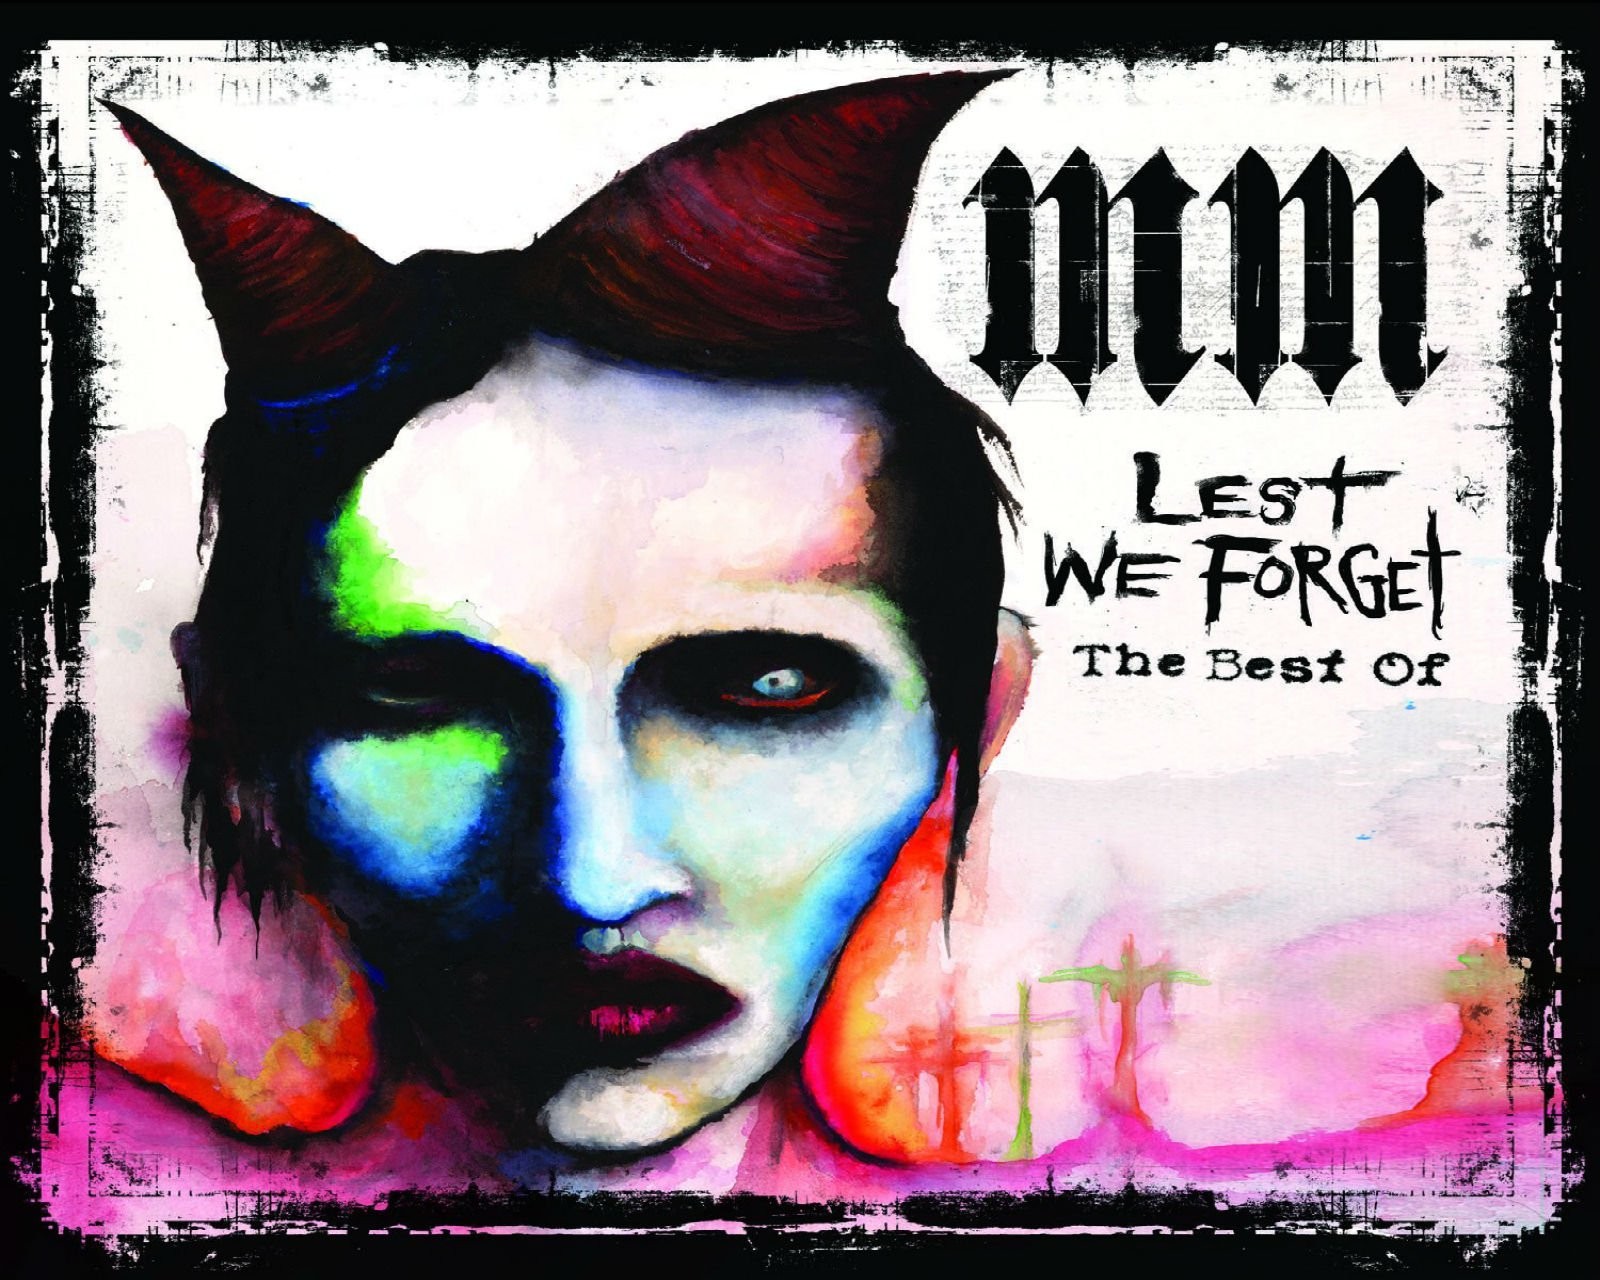 Marilyn Manson Lest We Forget The Best - HD Wallpaper 